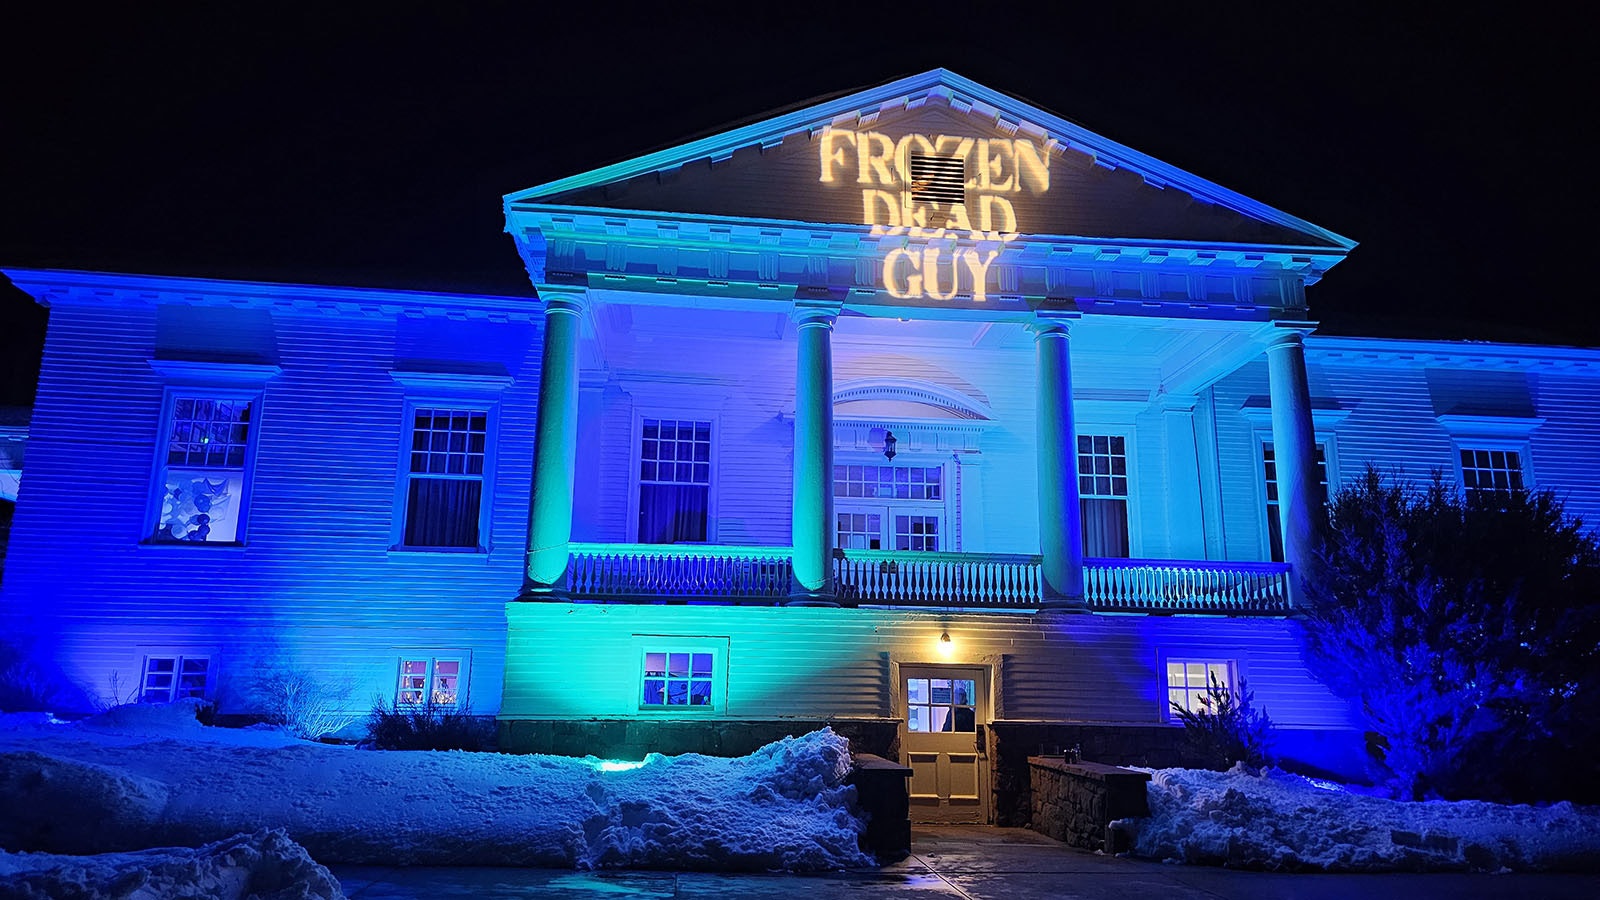 Frozen Dead Guy Days' Blue Ball is held at the famous Stanley Hotel in Estes Park, Colorado.